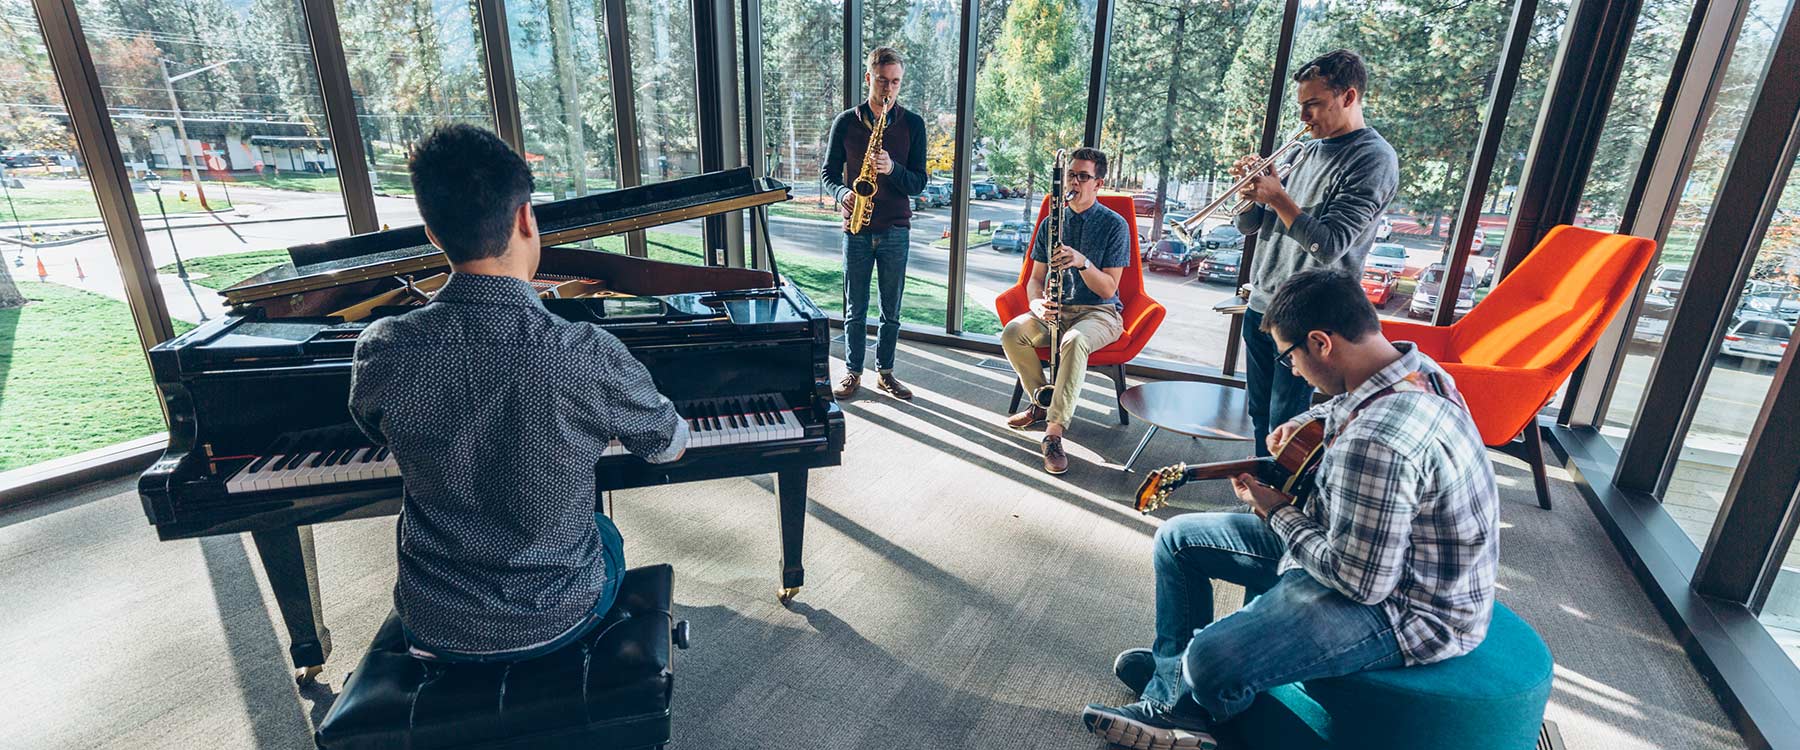 Five musicians in a sunlit room, playing piano, saxophone, trumpet, clarinet and guitar, seated by large windows.